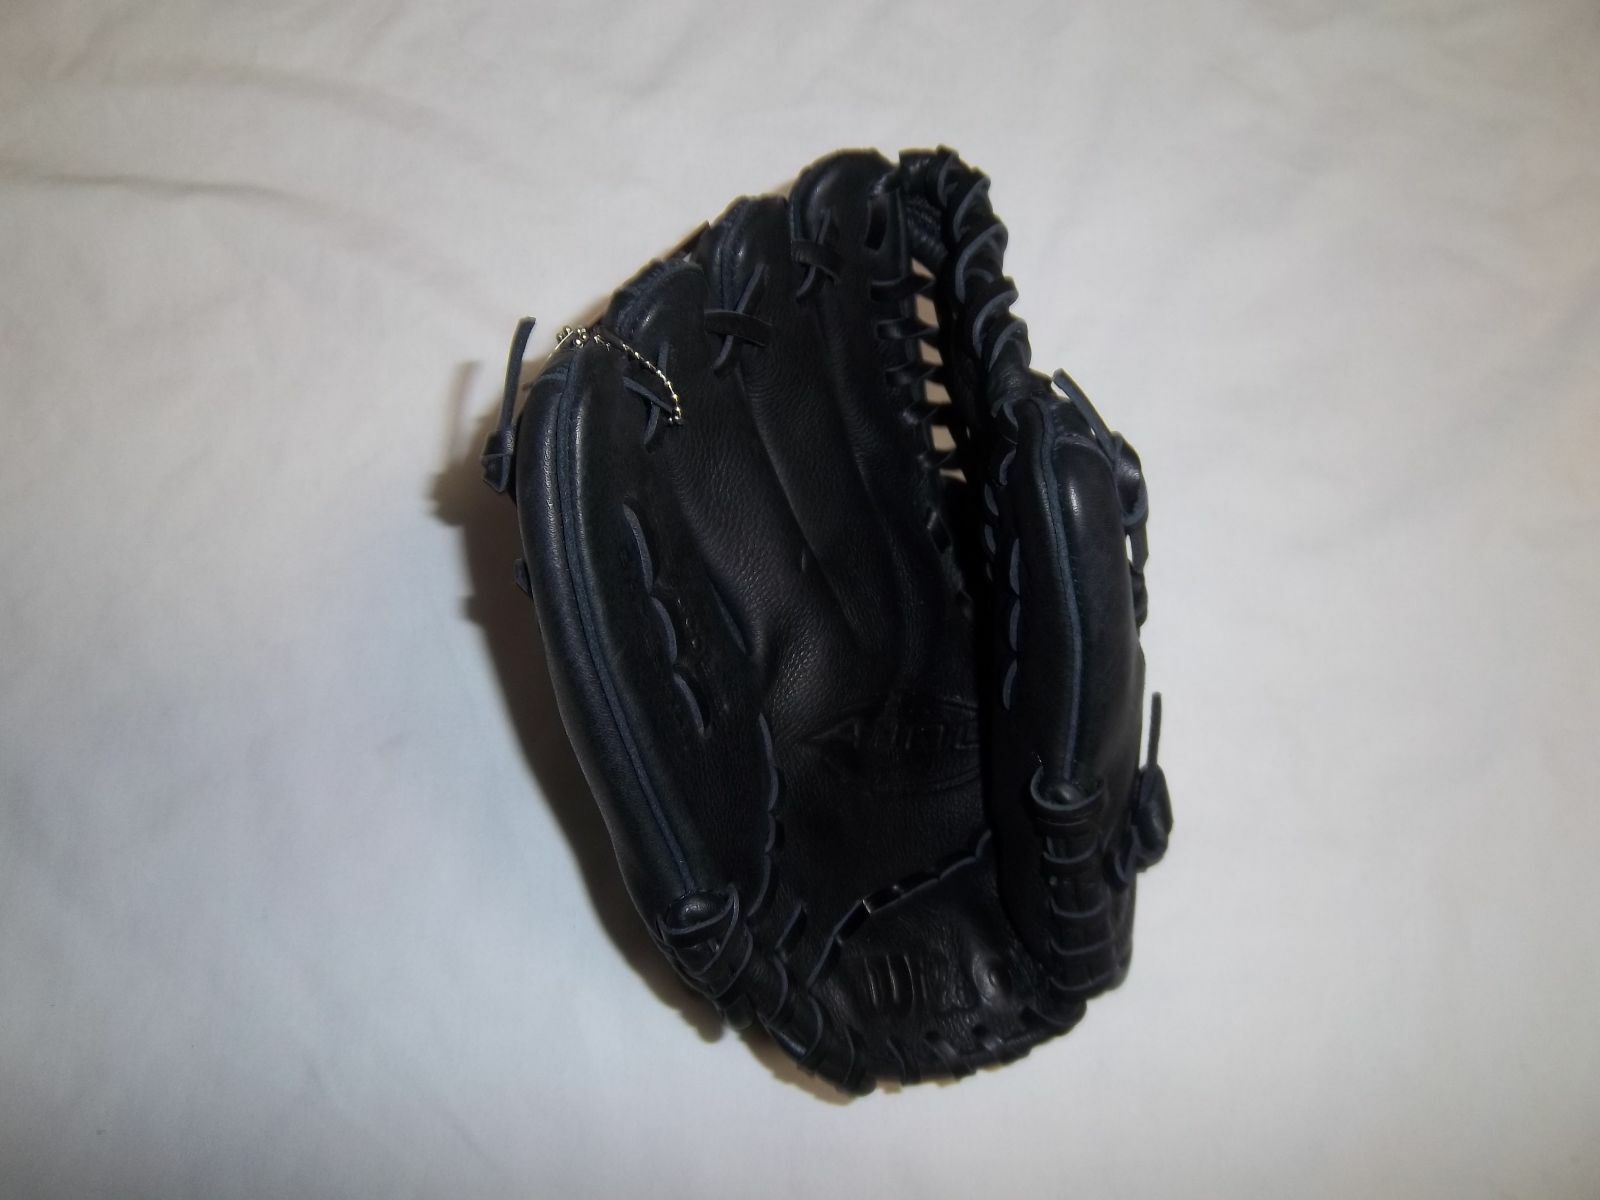 WILSON A1002 1796B 11 3/4' BASEBALL GLOVE LH PLAYER(GOES ON RIGHT HAND)